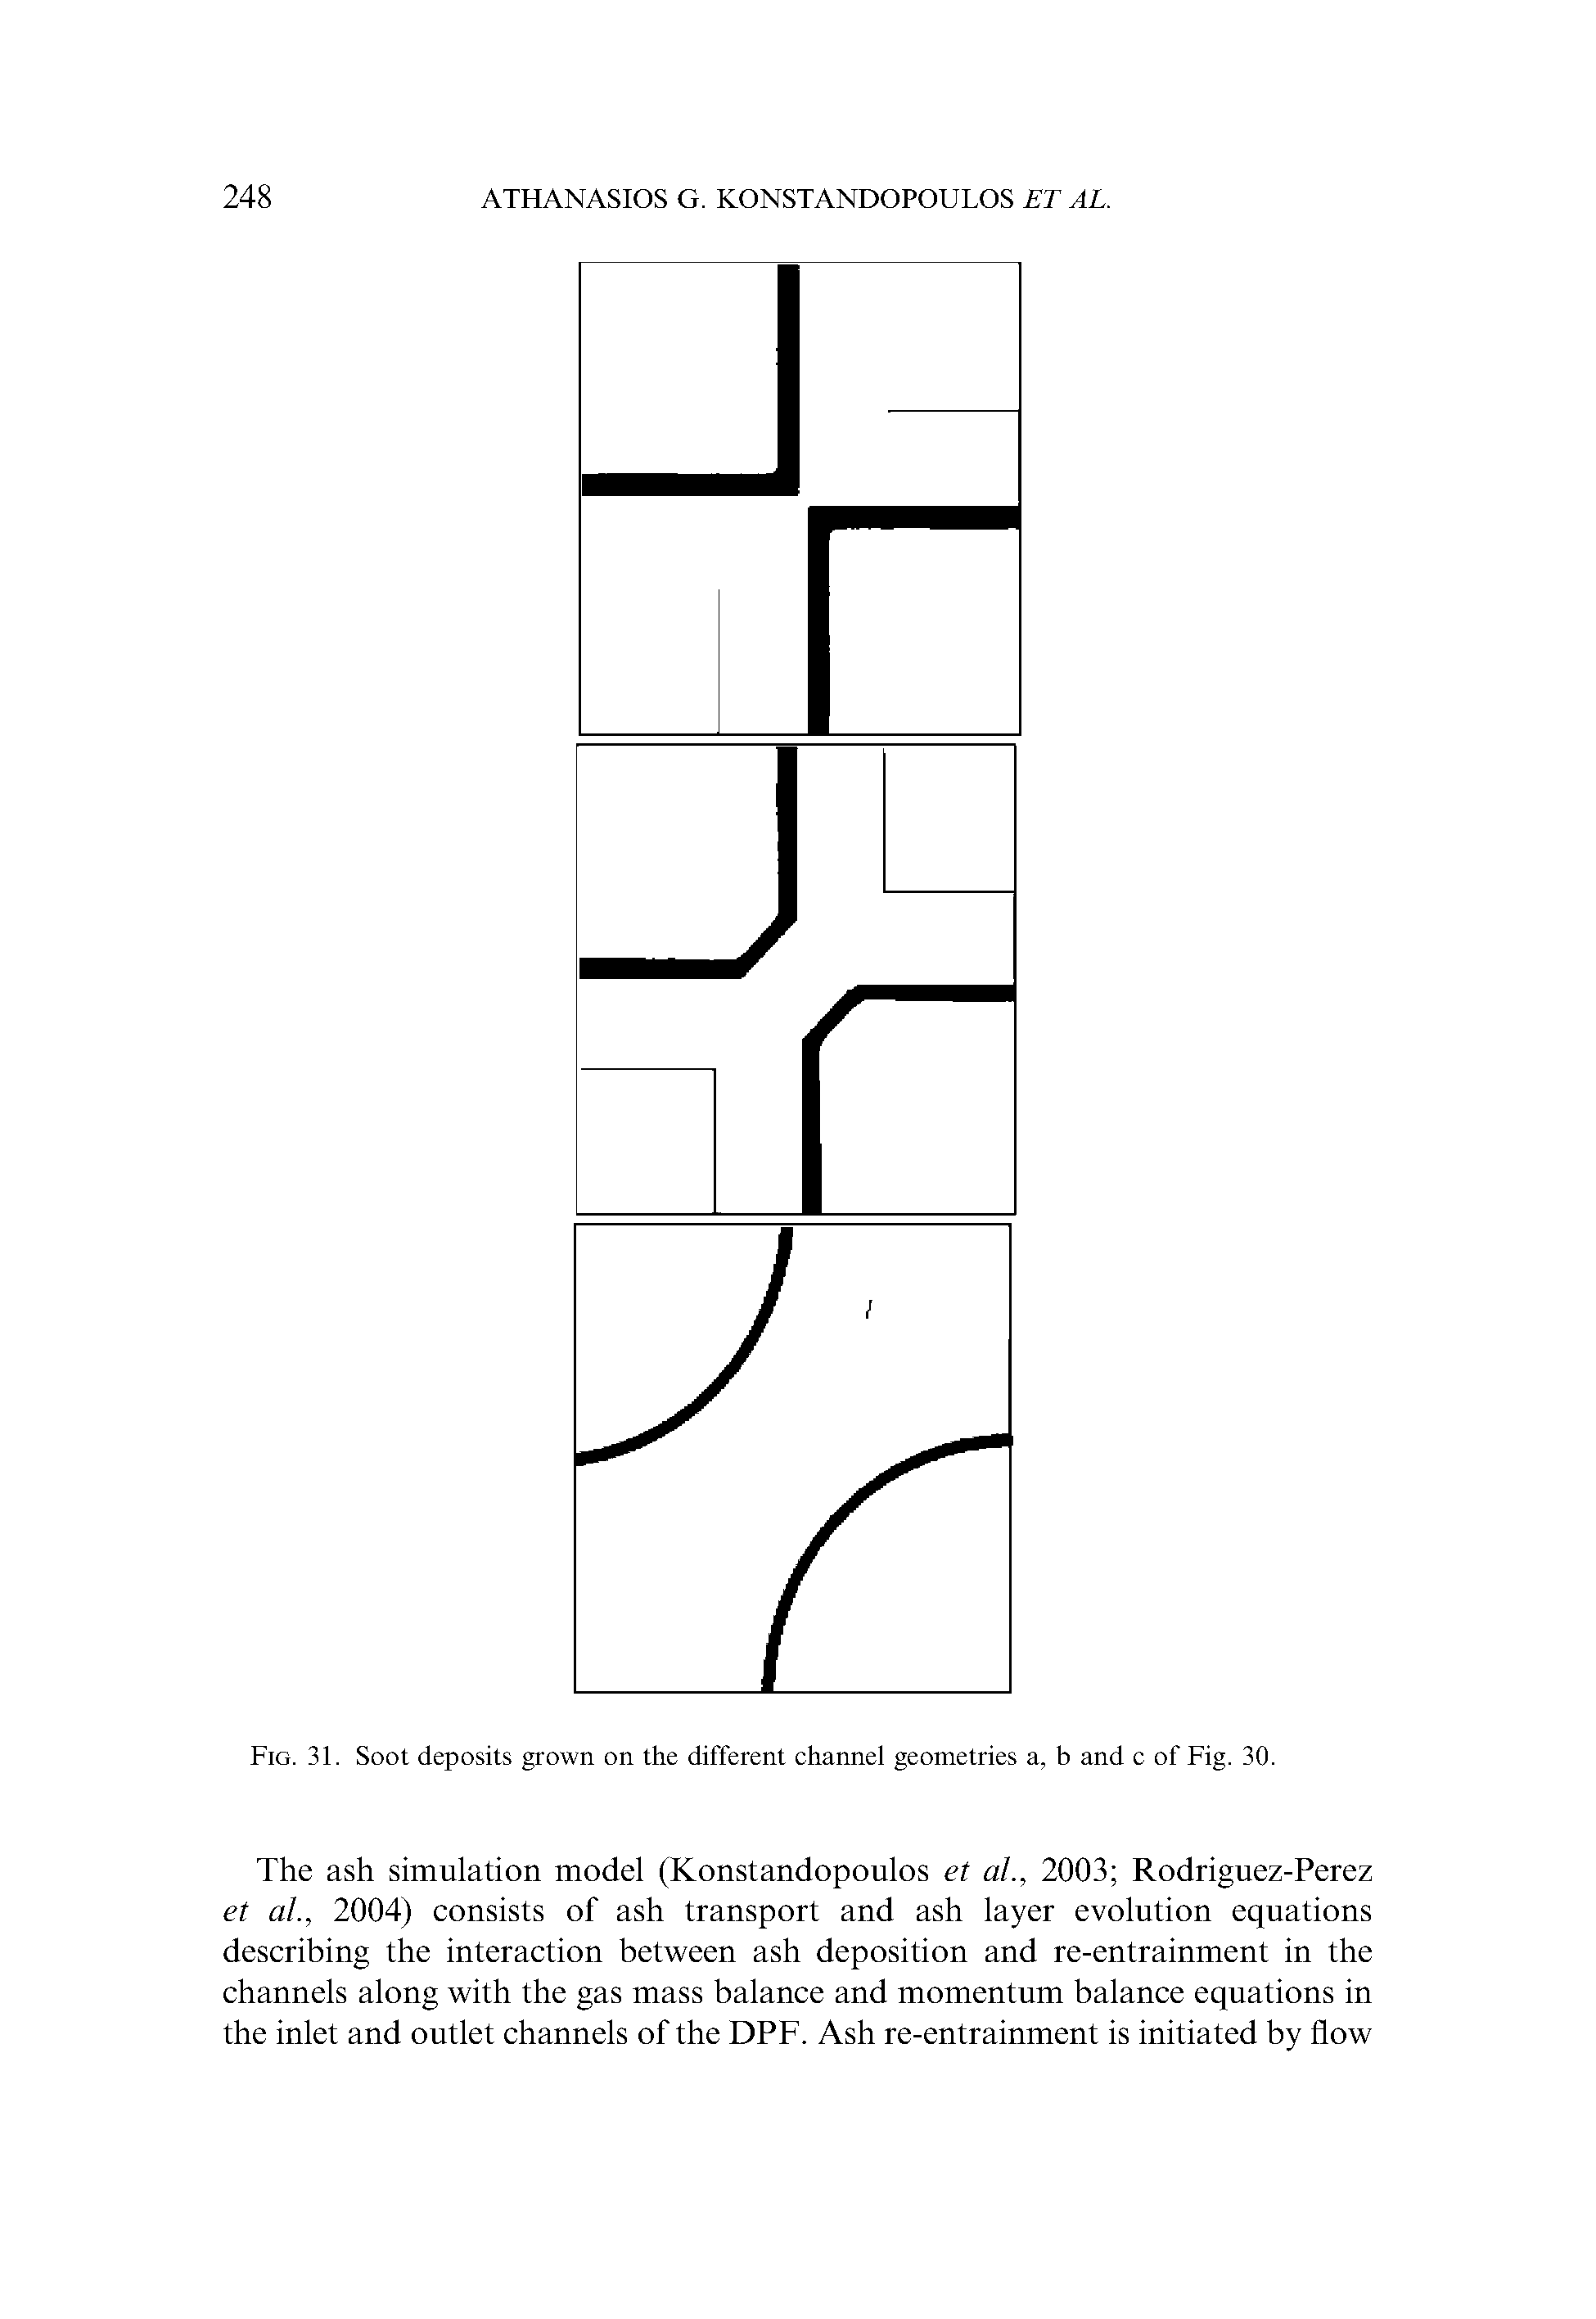 Fig. 31. Soot deposits grown on the different channel geometries a, b and c of Fig. 30.